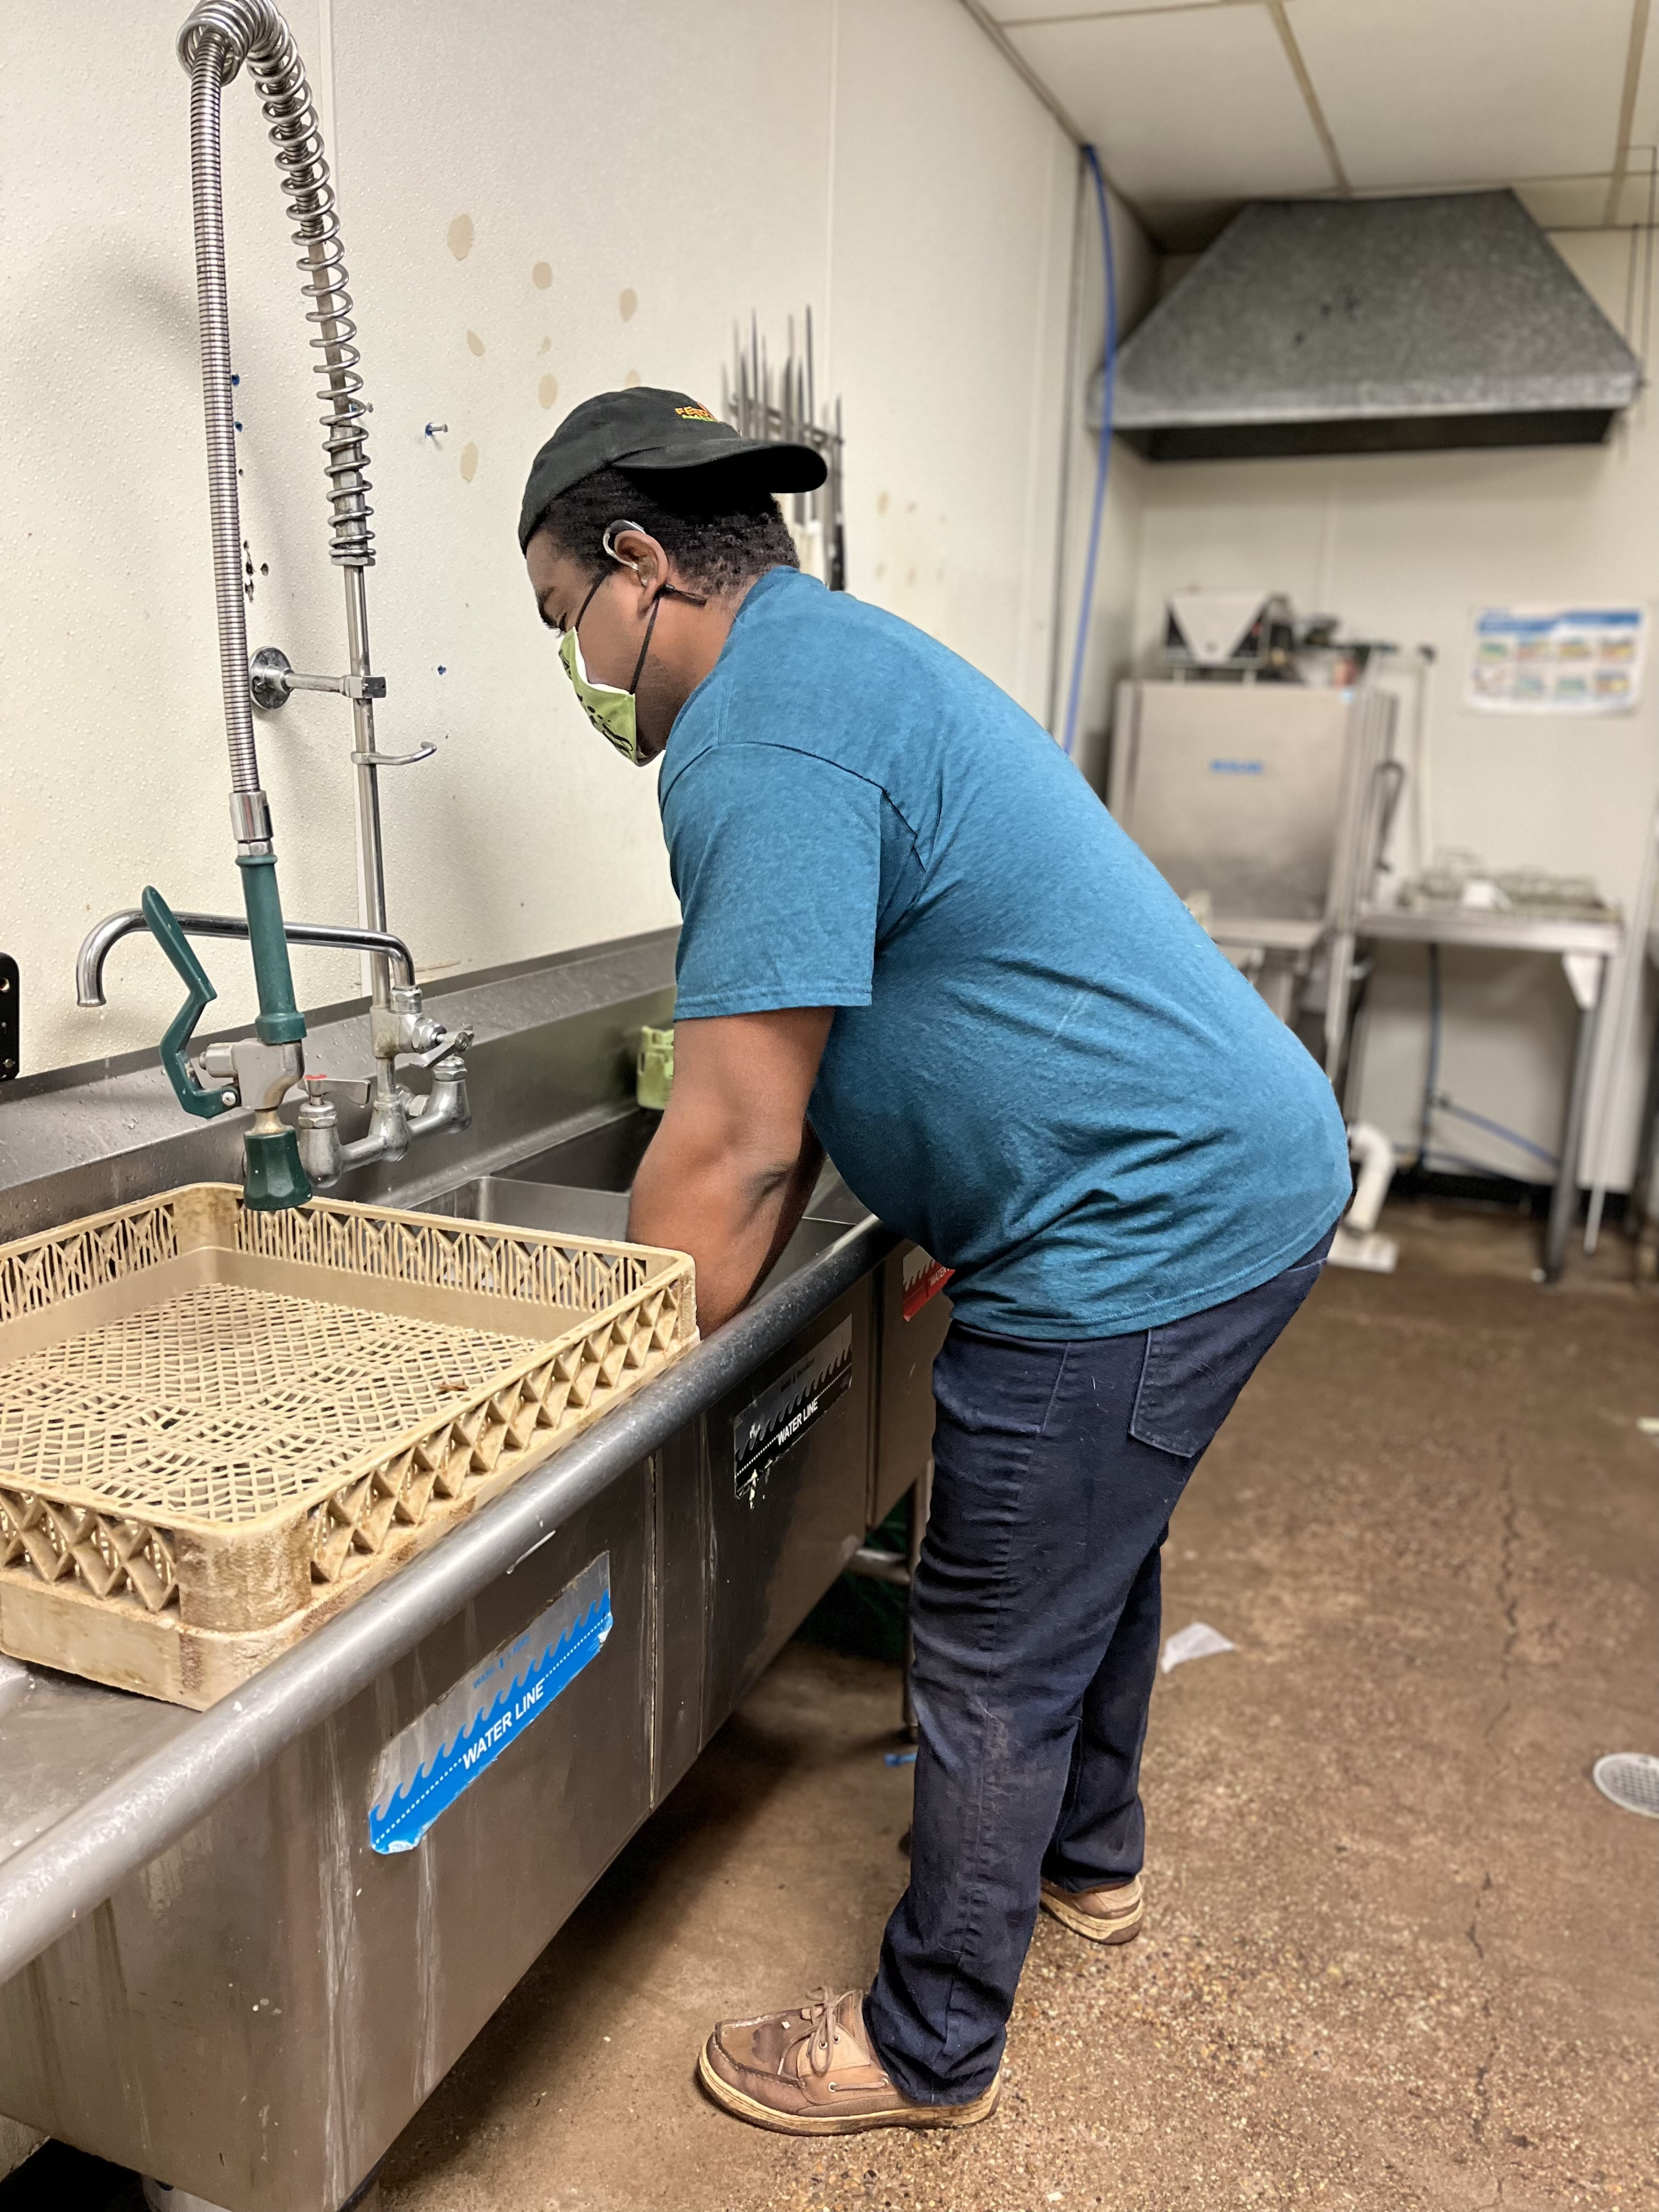 A man stands at a commercial sink and washes dishes.